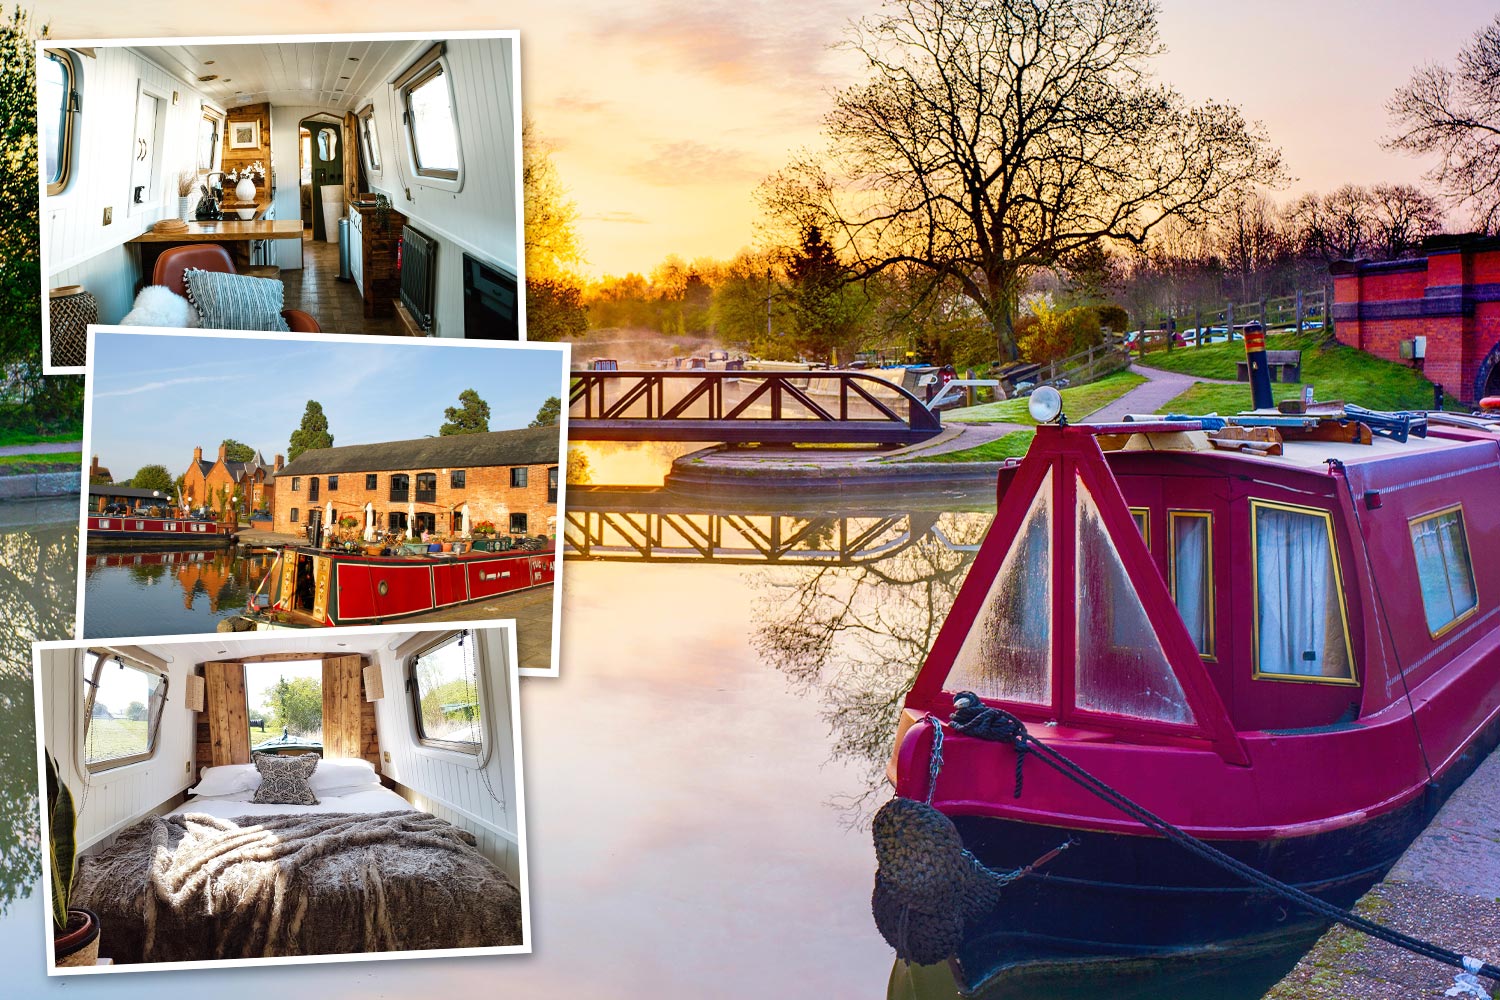 Make a splash with a relaxing break & explore 4,000 miles of canals in UK